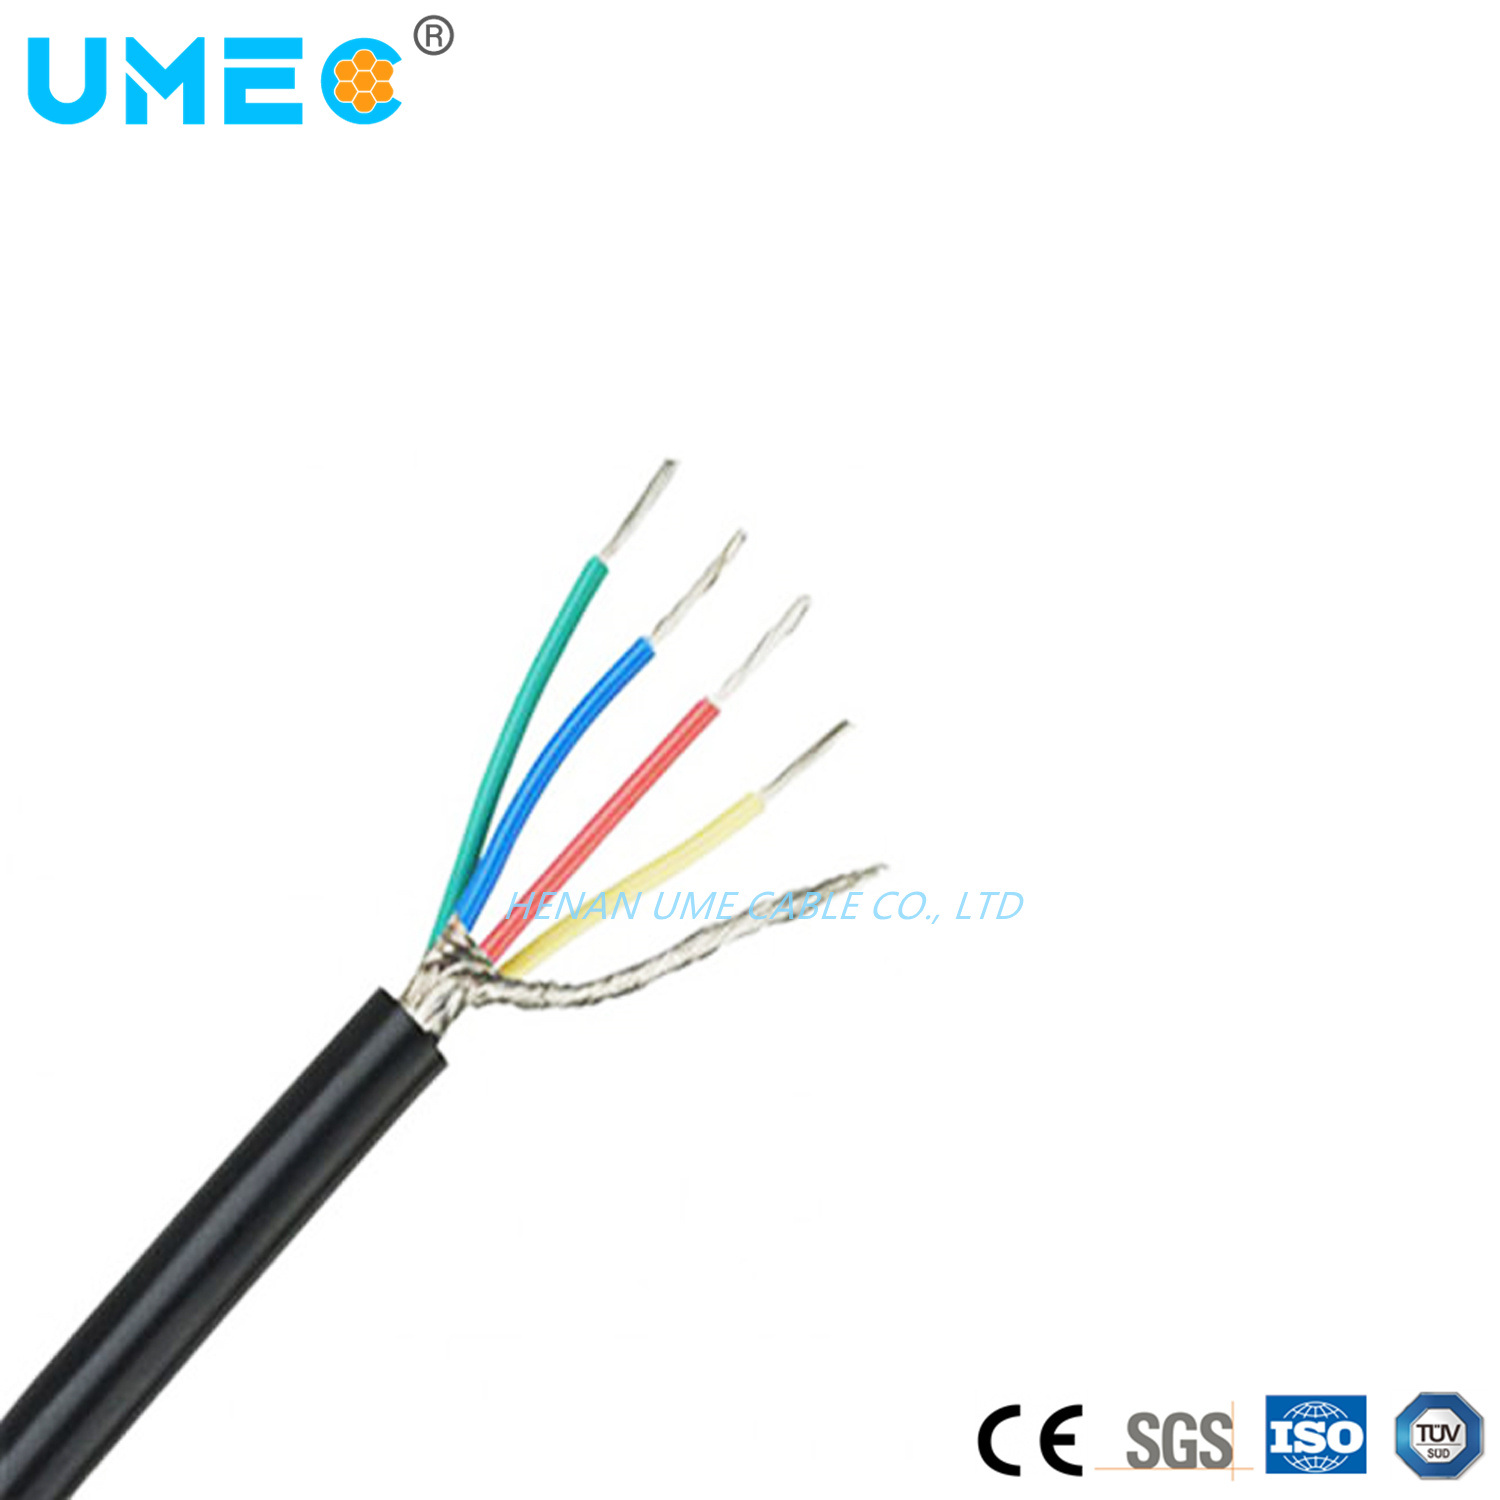 PVC Insulated Twisted Pair Control Cable/ Instrument Cable